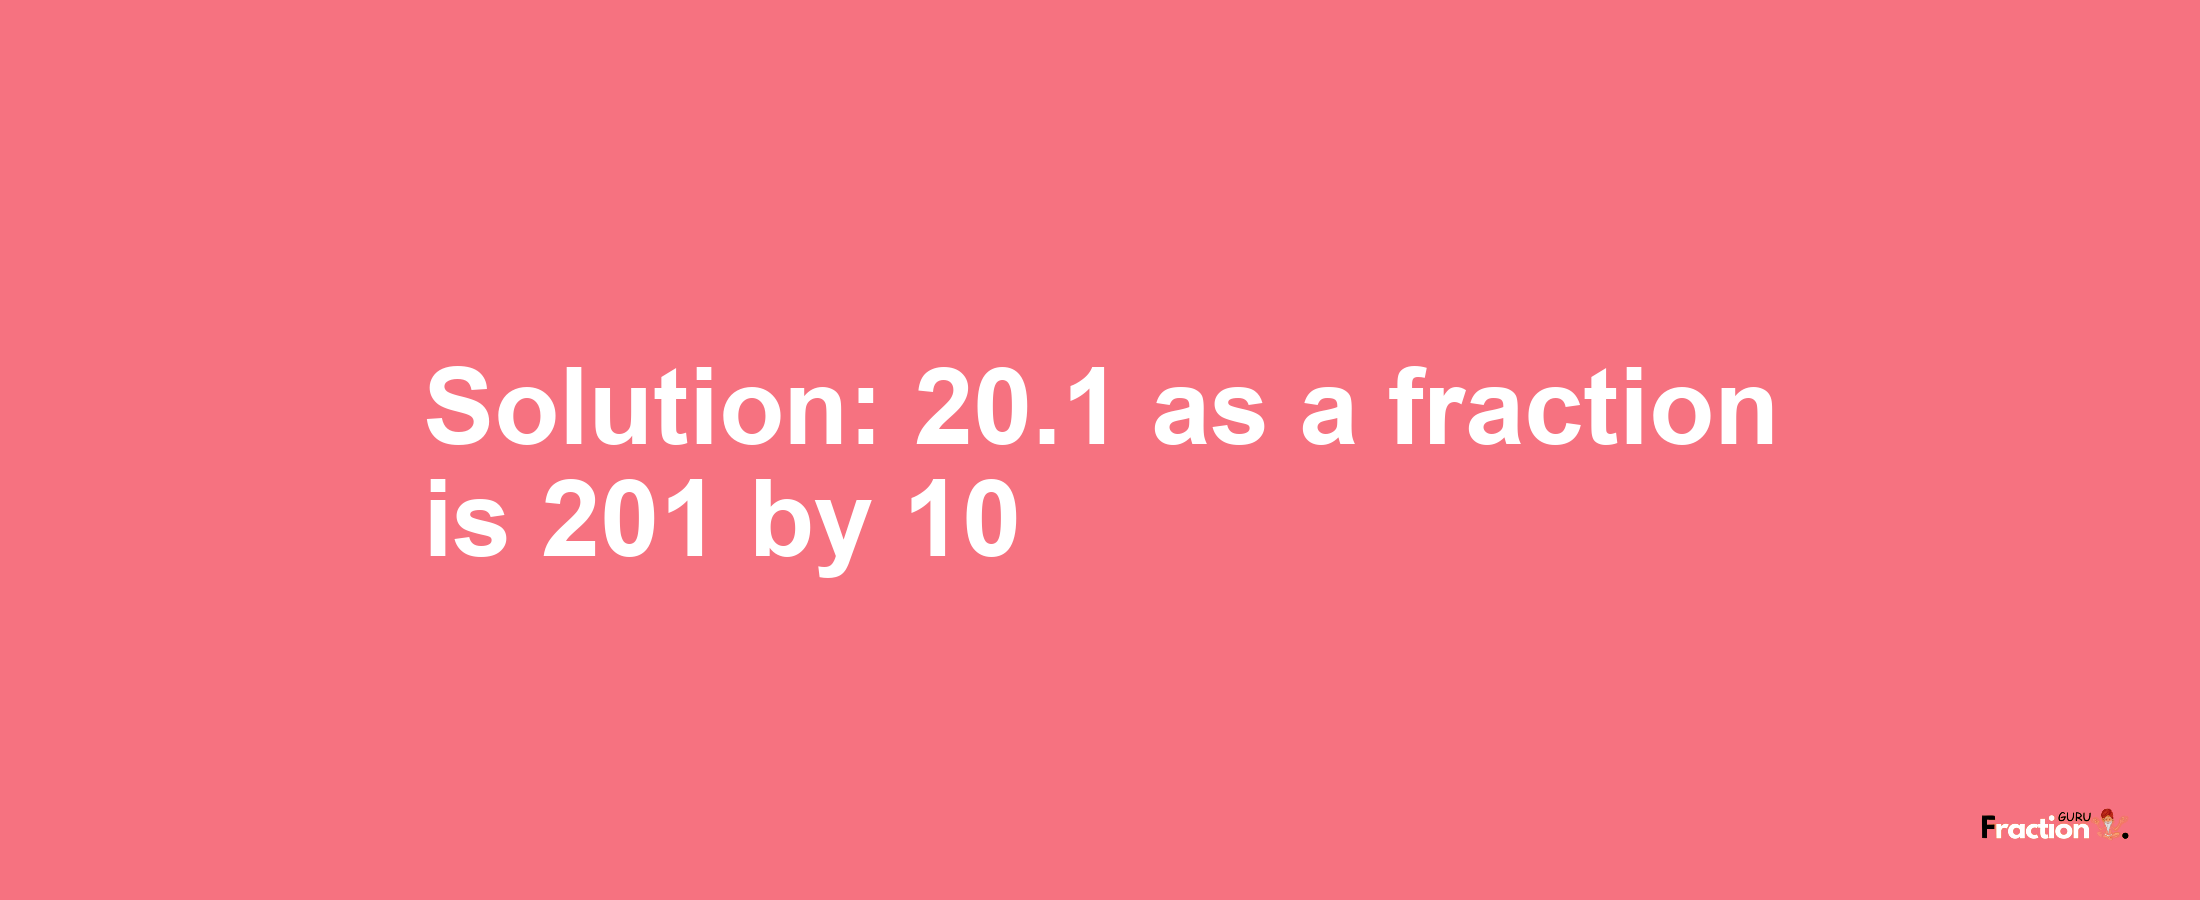 Solution:20.1 as a fraction is 201/10